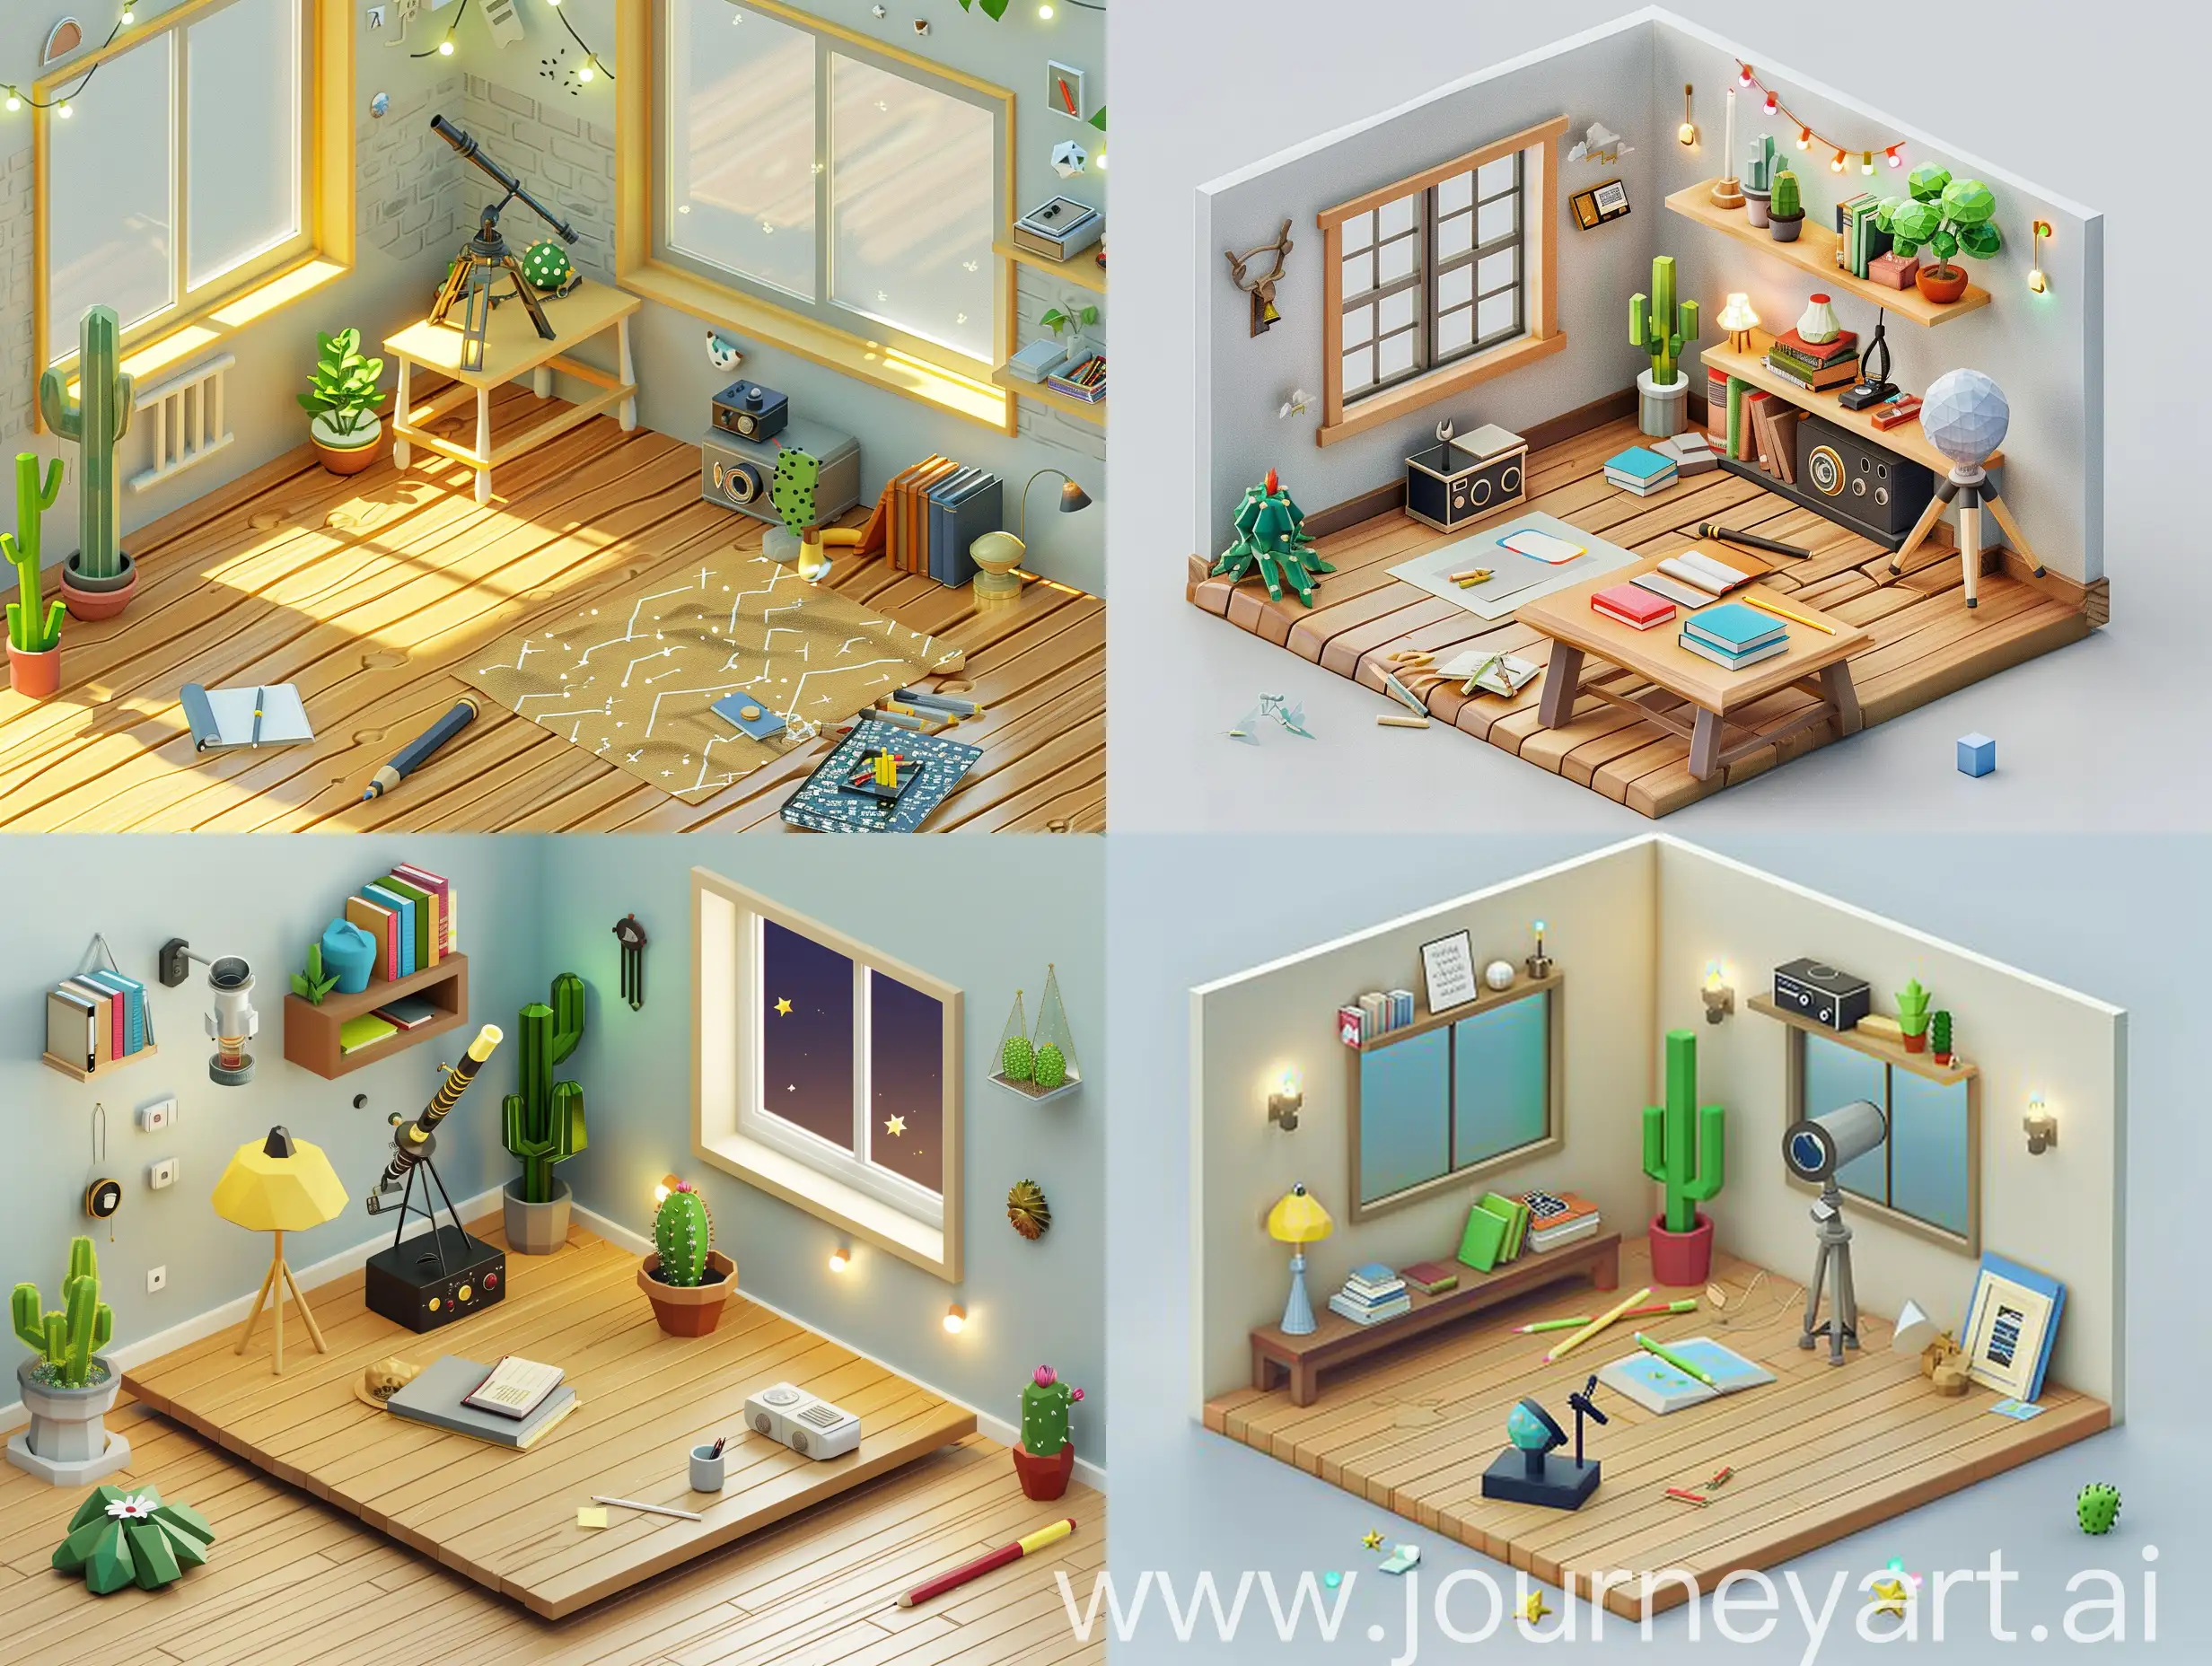 Super Detailed, Amazing Quality, Isometric View, Low Poly Room, Wood Flooring, Detailed Floor Plant, Window, Telescope, Shelf, Books, Table Lamp, Table Study Book, Pencil, Table Cactus, Radio, Wall Decorations, Fairy Lights, Detailed Low Poly Room